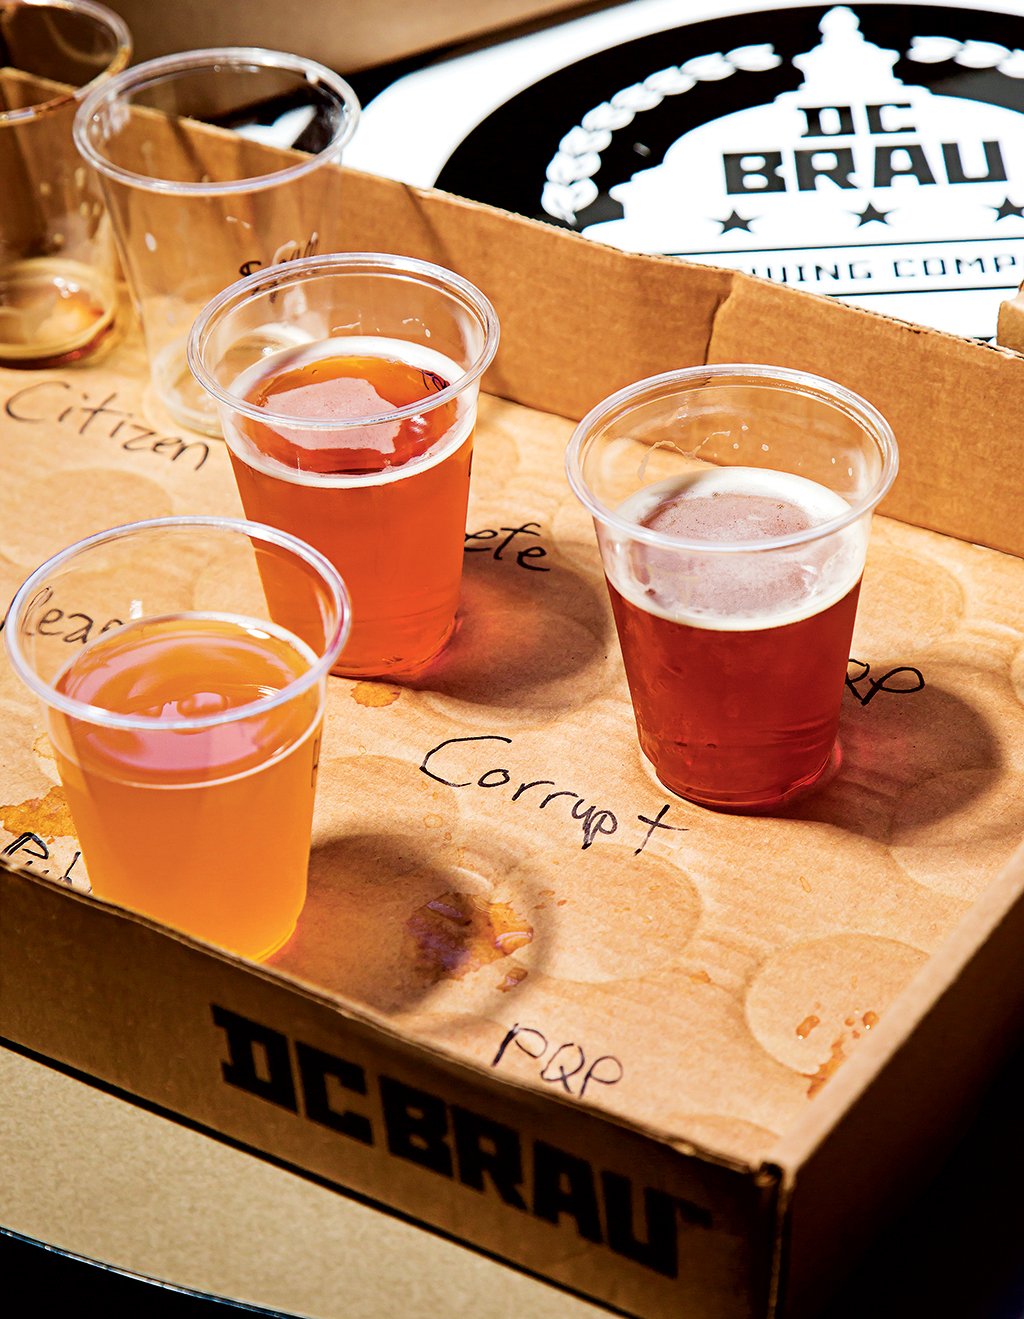 A sampling of pale ales and IPAs at DC Brau. Photograph by Scott Suchman.